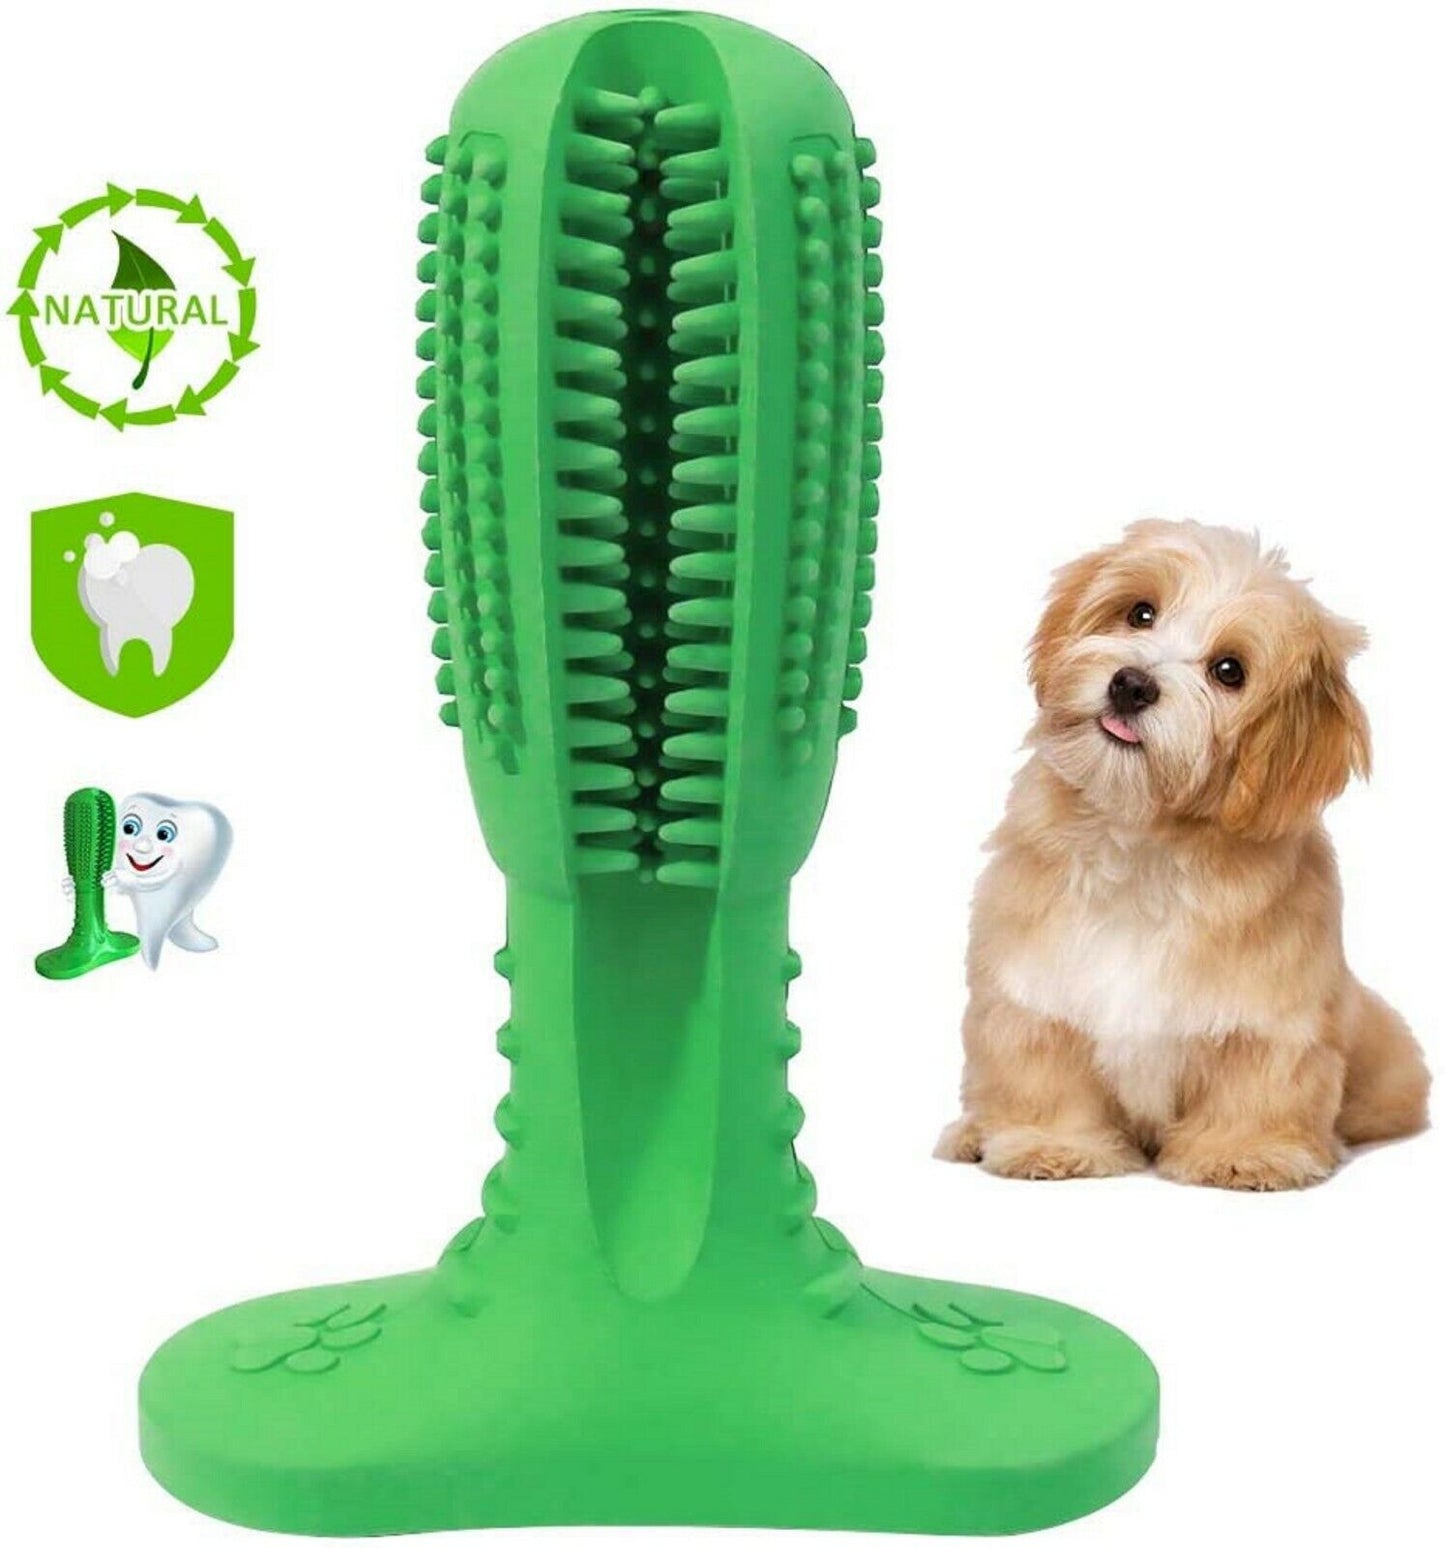 Dental Care Brushing Stick Toothbrush for Dogs